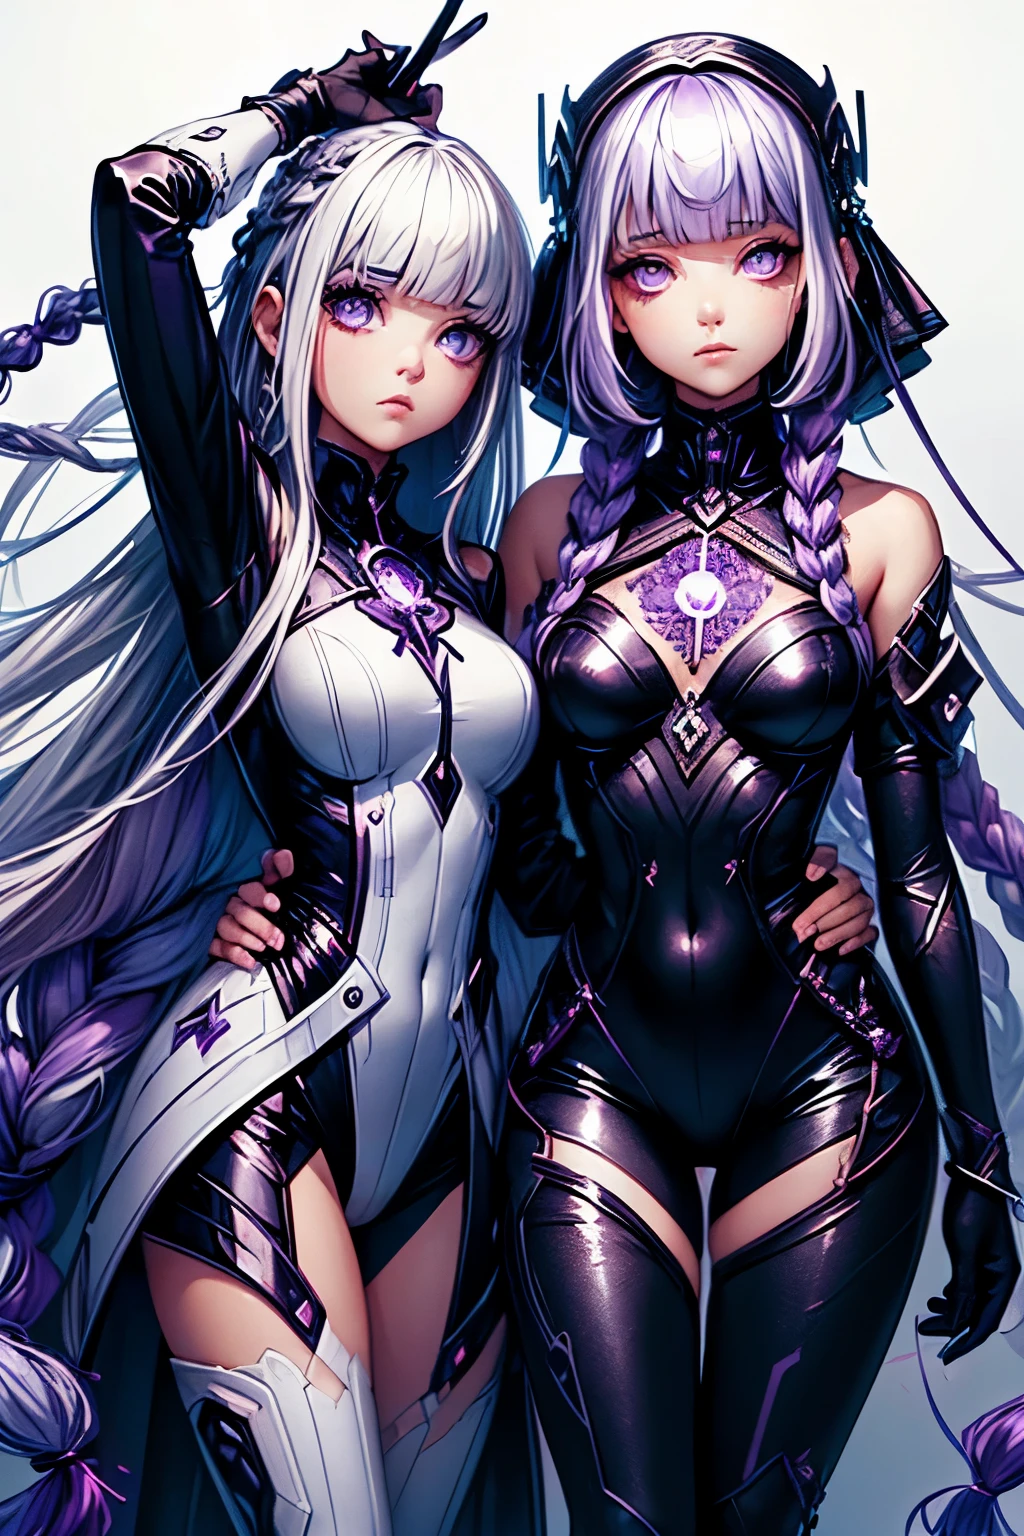 (ultra-detailed face, sleepy eyes:1.2), (2girls:1.3), (A mysterious girl and her friend are break dancing and jumping in a daring pose with their backs to each other:1.4), BREAK (Cryptic Girl has (long purple-white gradient hair), Hair braided in two large sections. She is indifferent, kind and has lavender eyes:1.3), BREAK (Cryptic Girl's friend has white hair, blunt bangs, a bob cut and lavender eyes:1.1), BREAK (The girl is wearing a lace and ruffled cape dress and mini skirt), BREAK (In the background, in space, mysterious cryptograms and a glowing key can be seen)